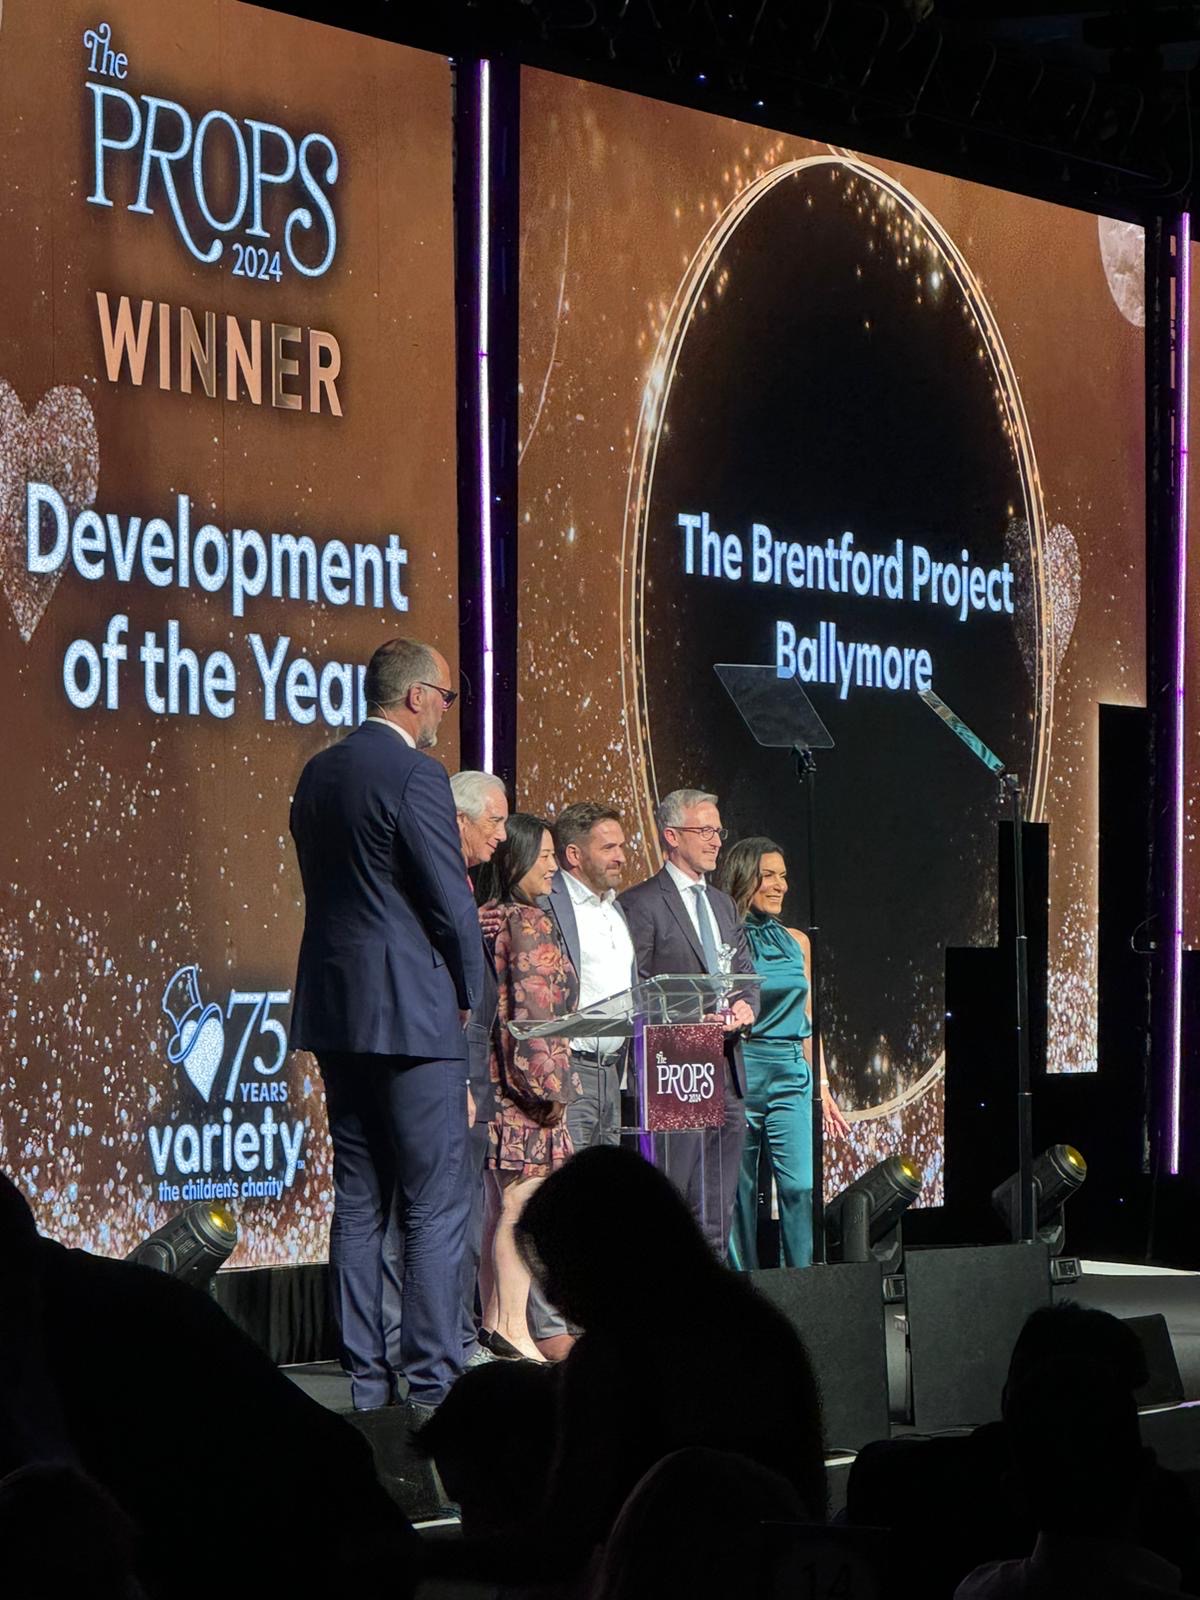 The Brentford Project named Development of the Year